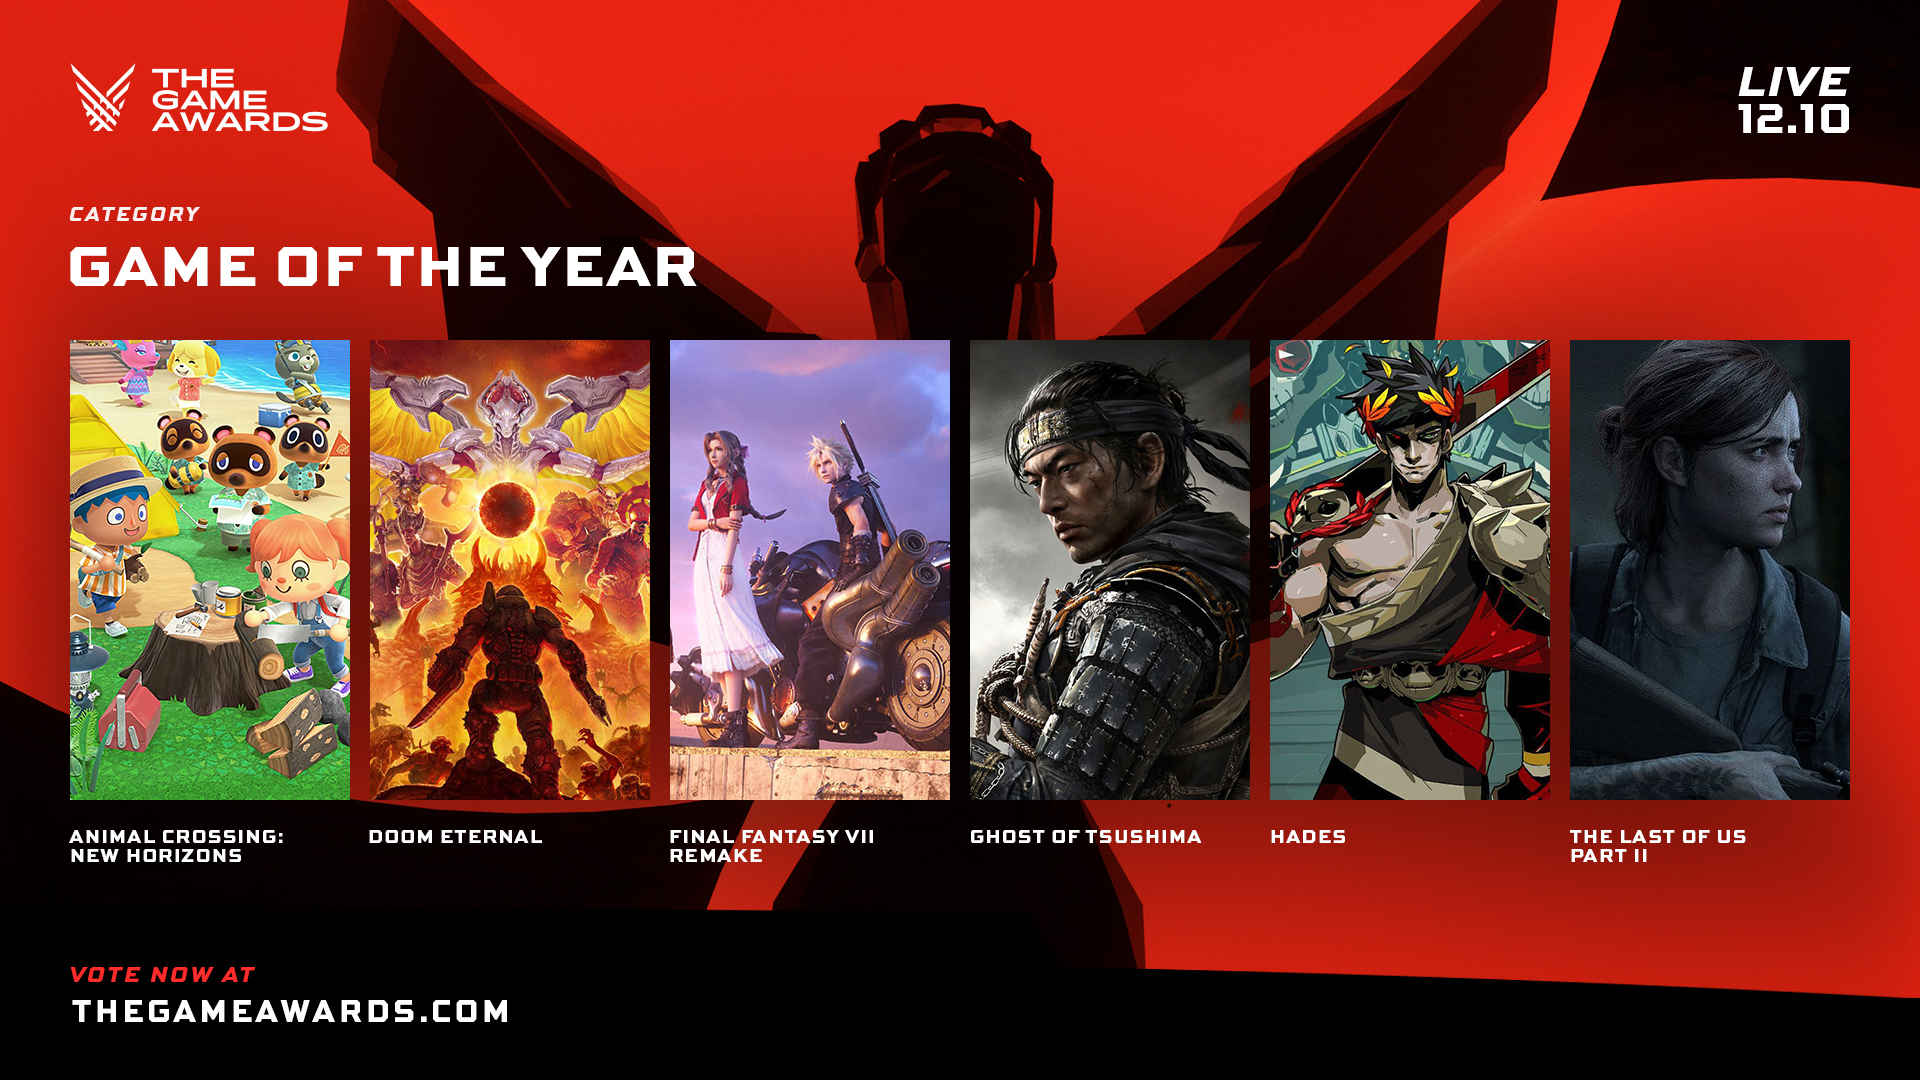 Six nominees for GAME OF THE YEAR 2022